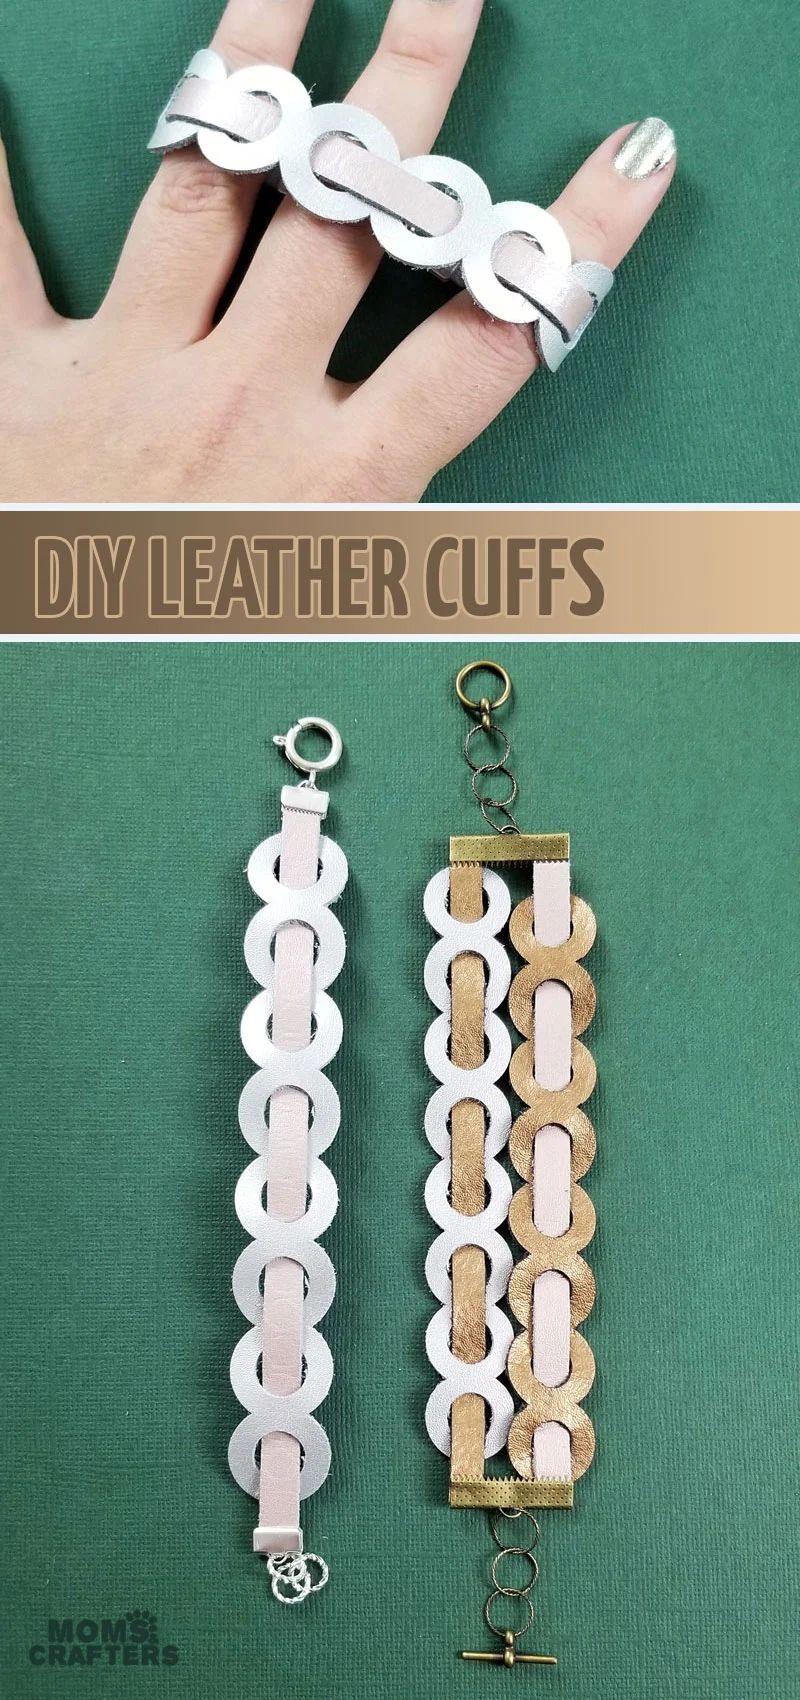 Make DIY leather cuffs with a free template! Use the free SVG or PDF AND learn how to make woven leather cuffs using Cricut - a fun cricut maker project for beginners and a sweet leather jewelry craft.